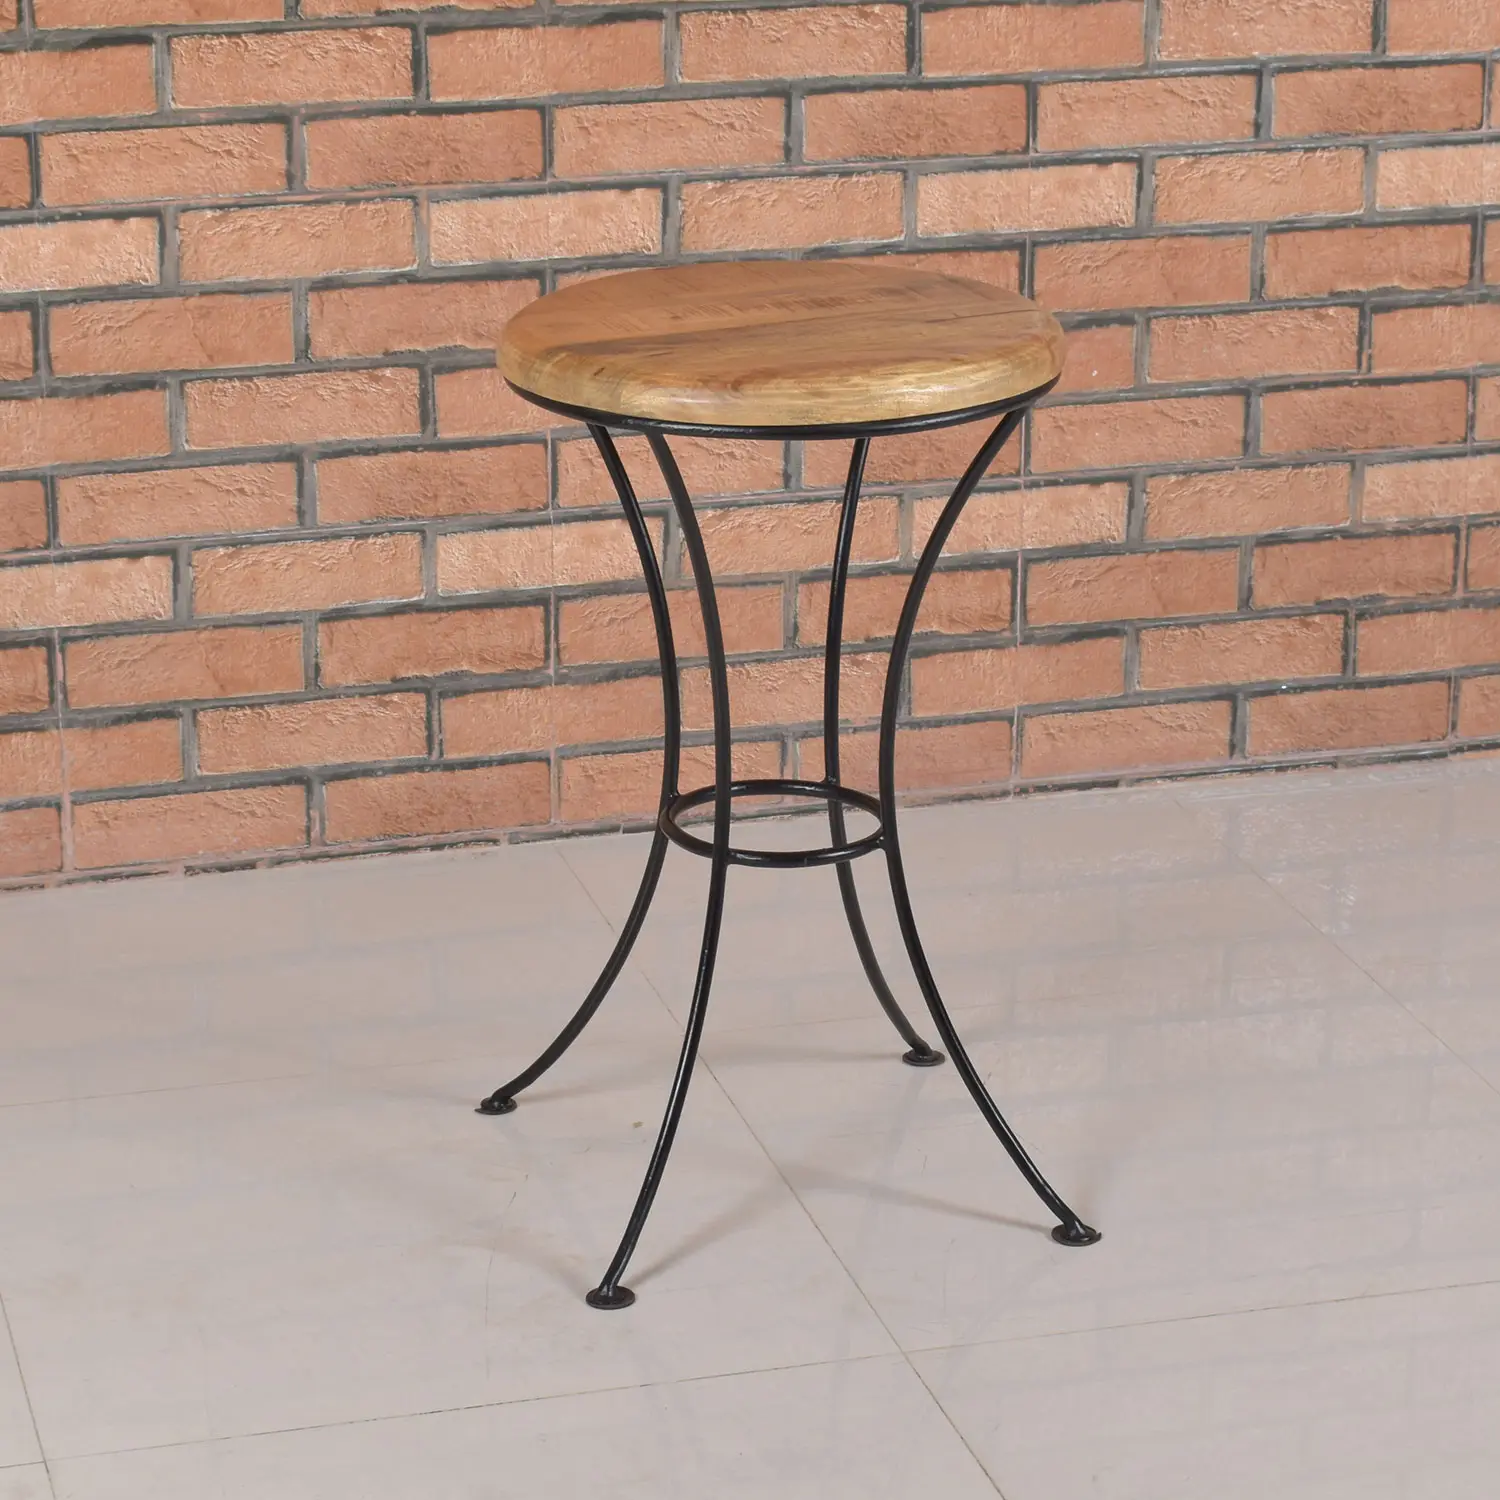 Iron Side Table with Wooden Top - popular handicrafts